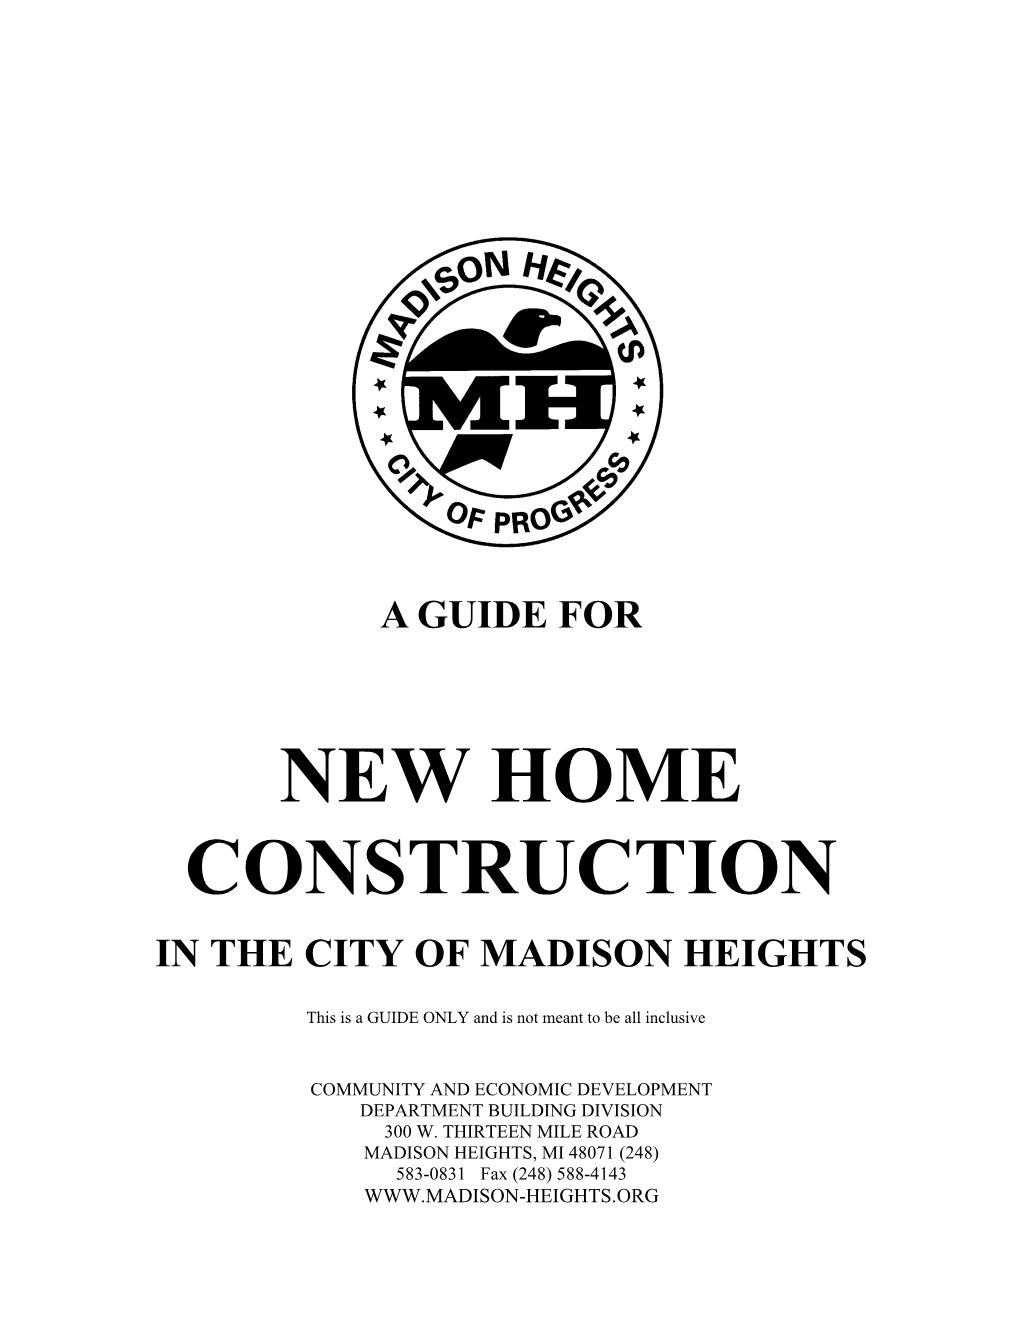 New Home Construction in the City of Madison Heights